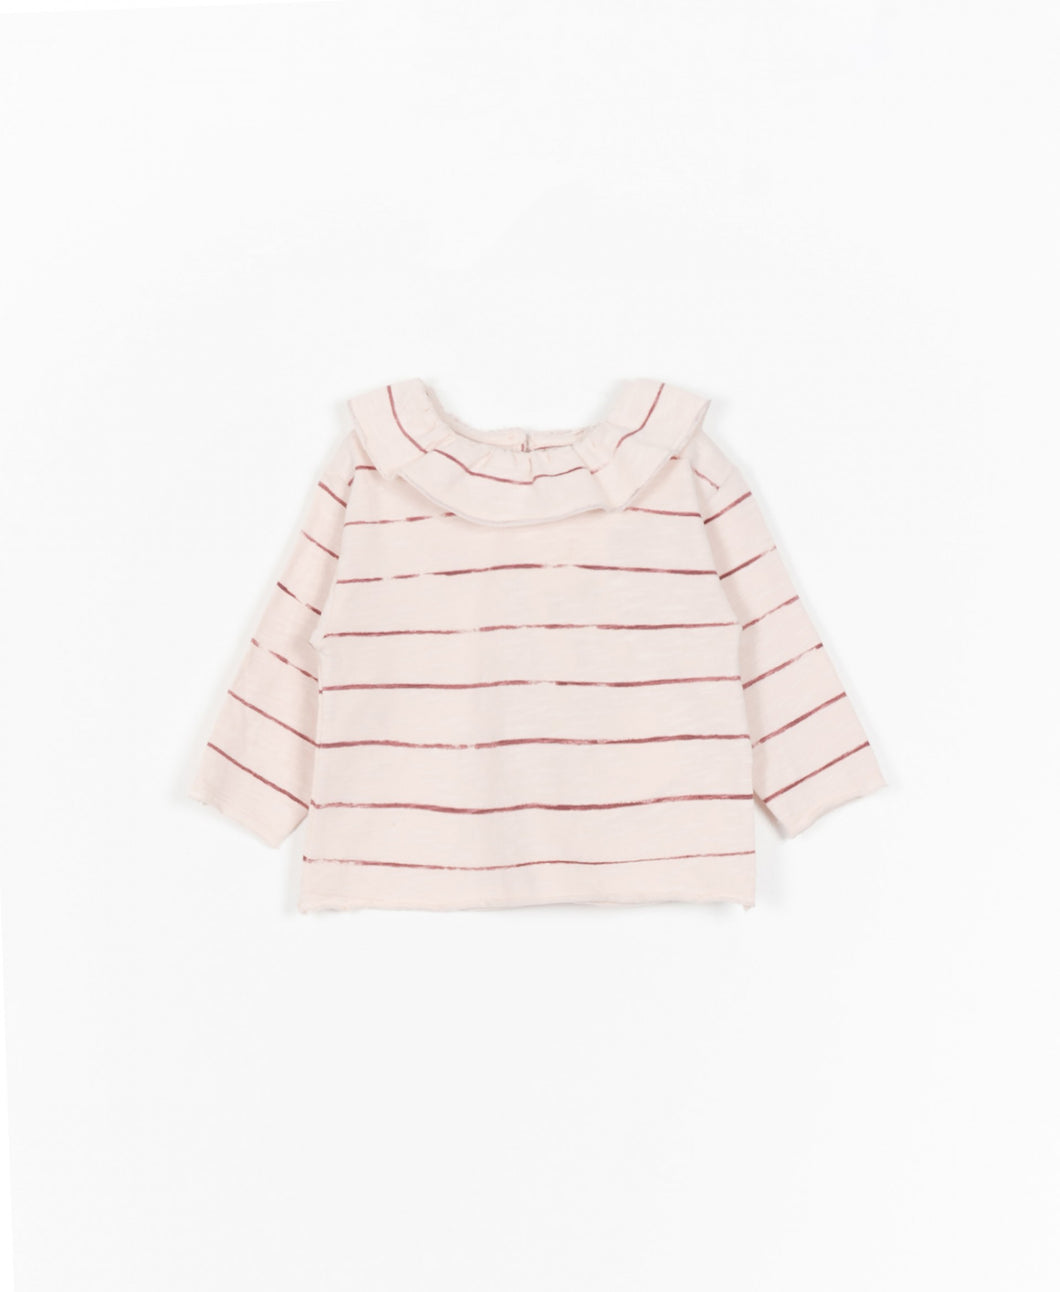 Striped Long Sleeve with Ruffle Collar